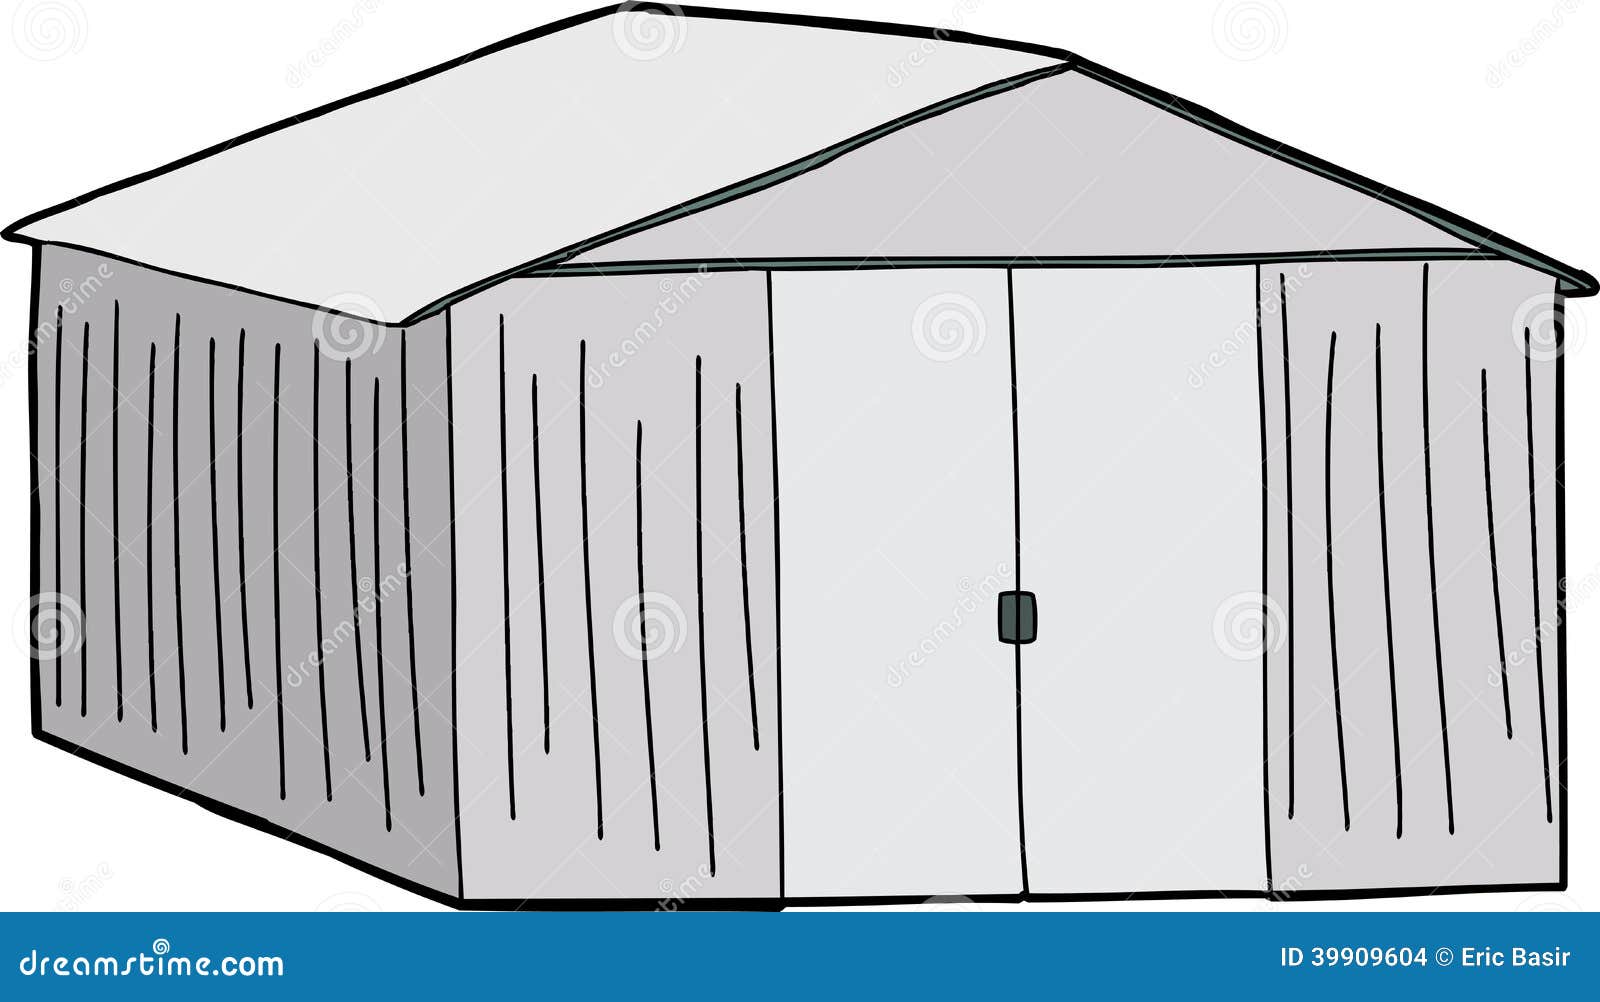 Cartoon of large shed with double doors on white background.